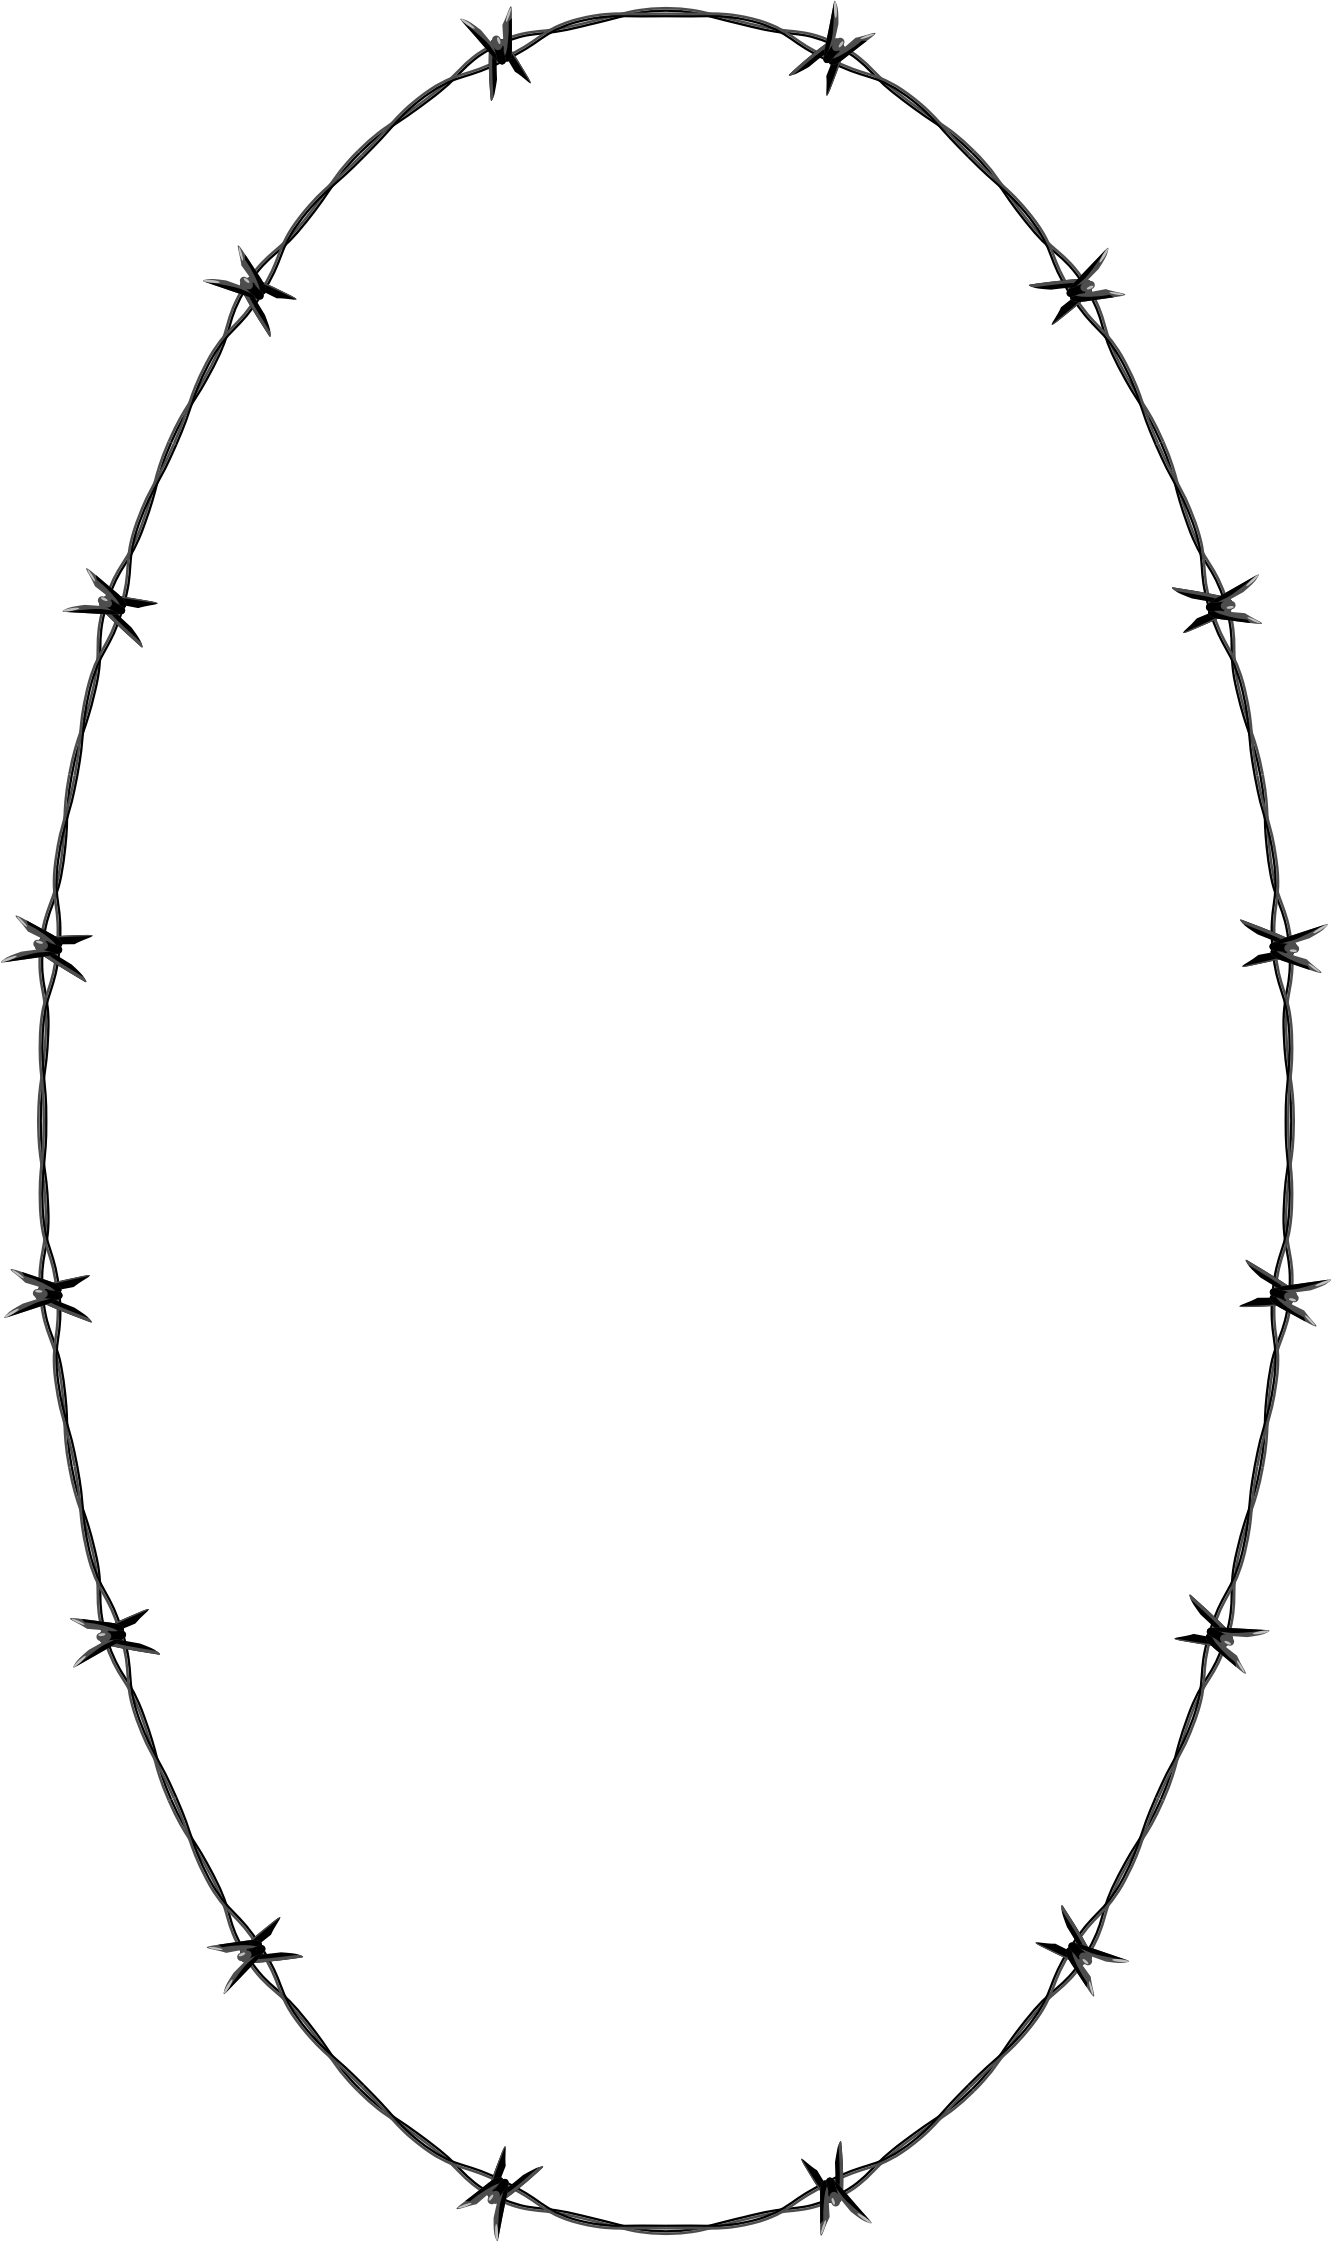 Barbwire Download PNG Image